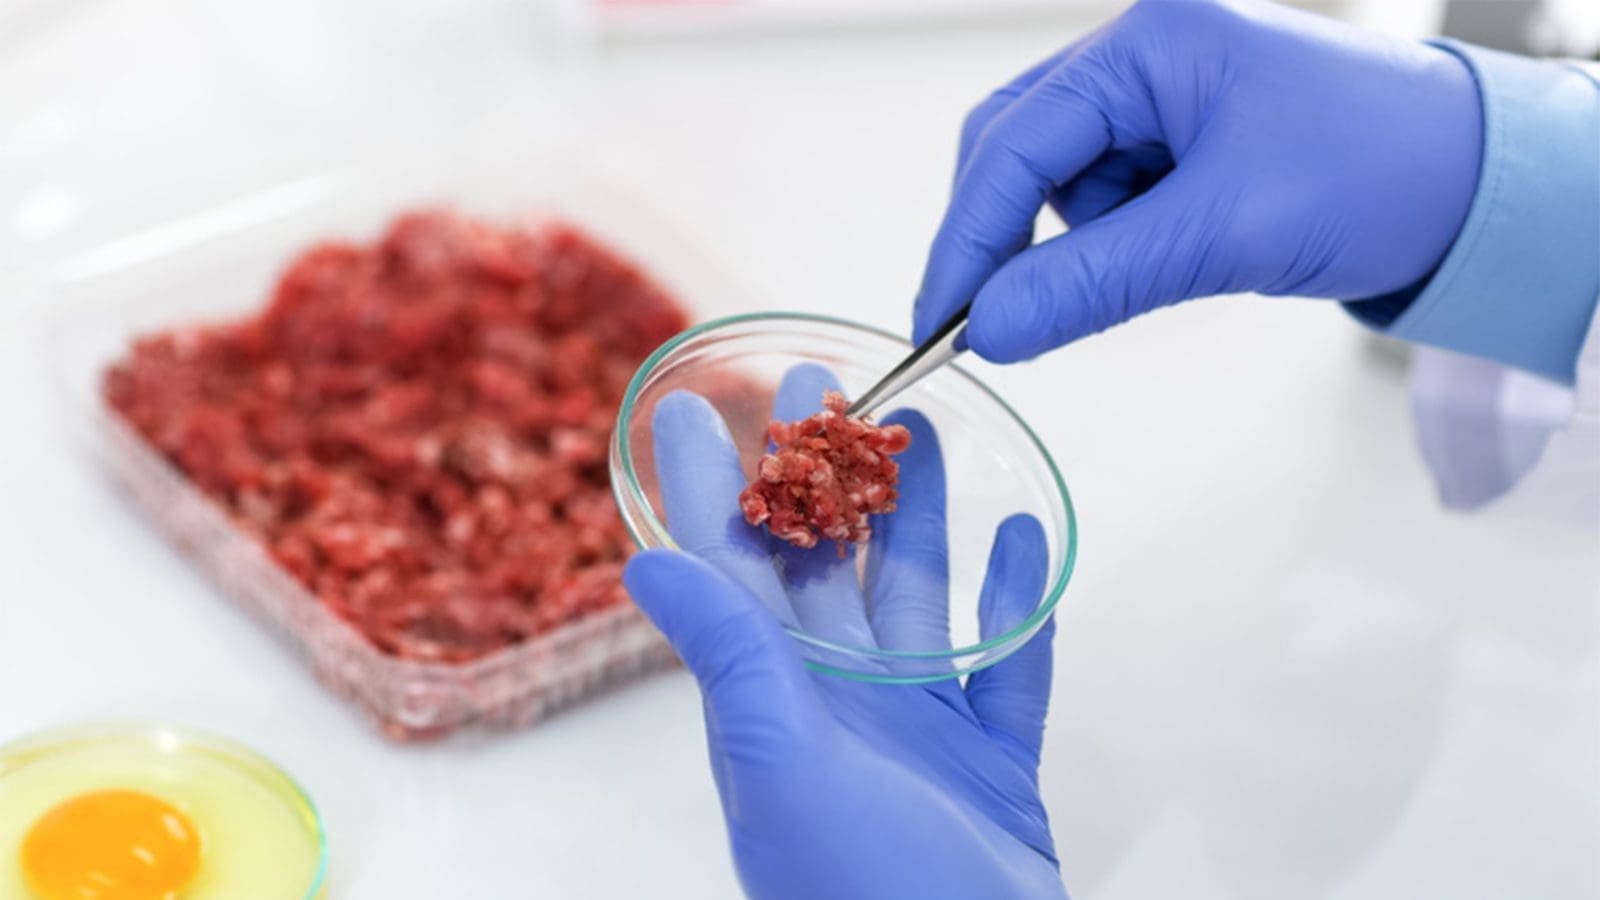 UK Food Standards Agency identifies hazards linked to cell-based meat